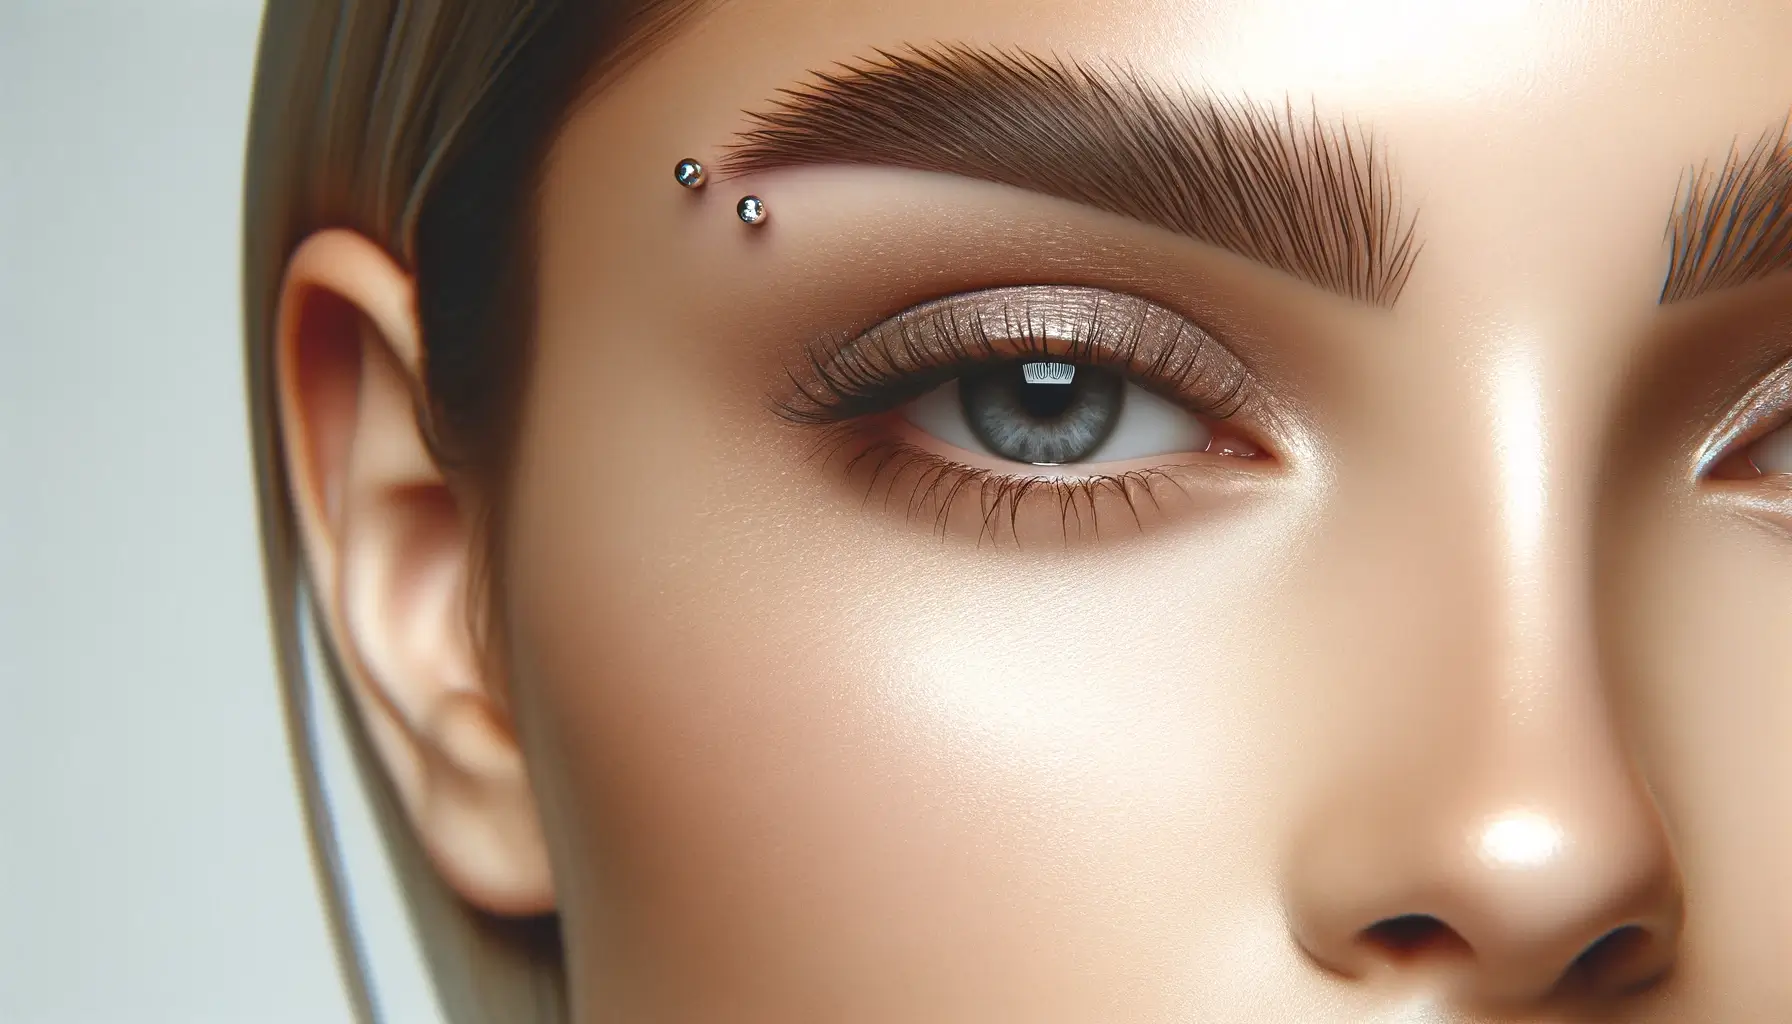 Close-up of a perfectly healed eyebrow piercing showcasing clear, healthy skin